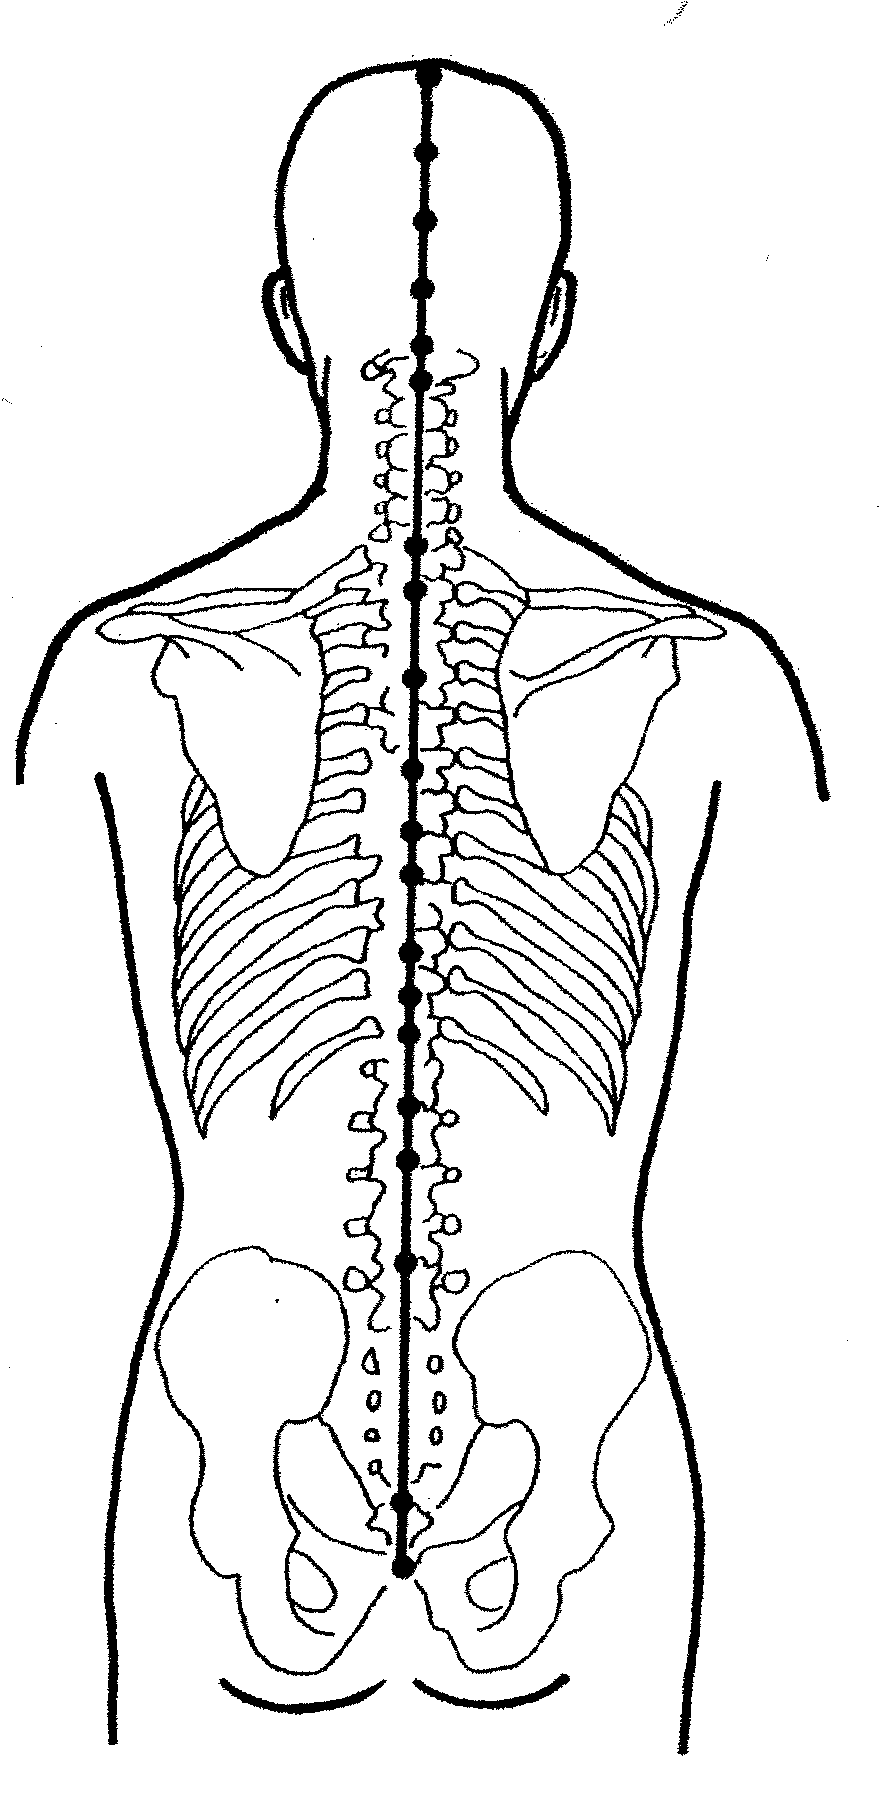 The Du Meridian in acupuncture, an alternative medicine for spinal cord injury (SCI) and physical disability